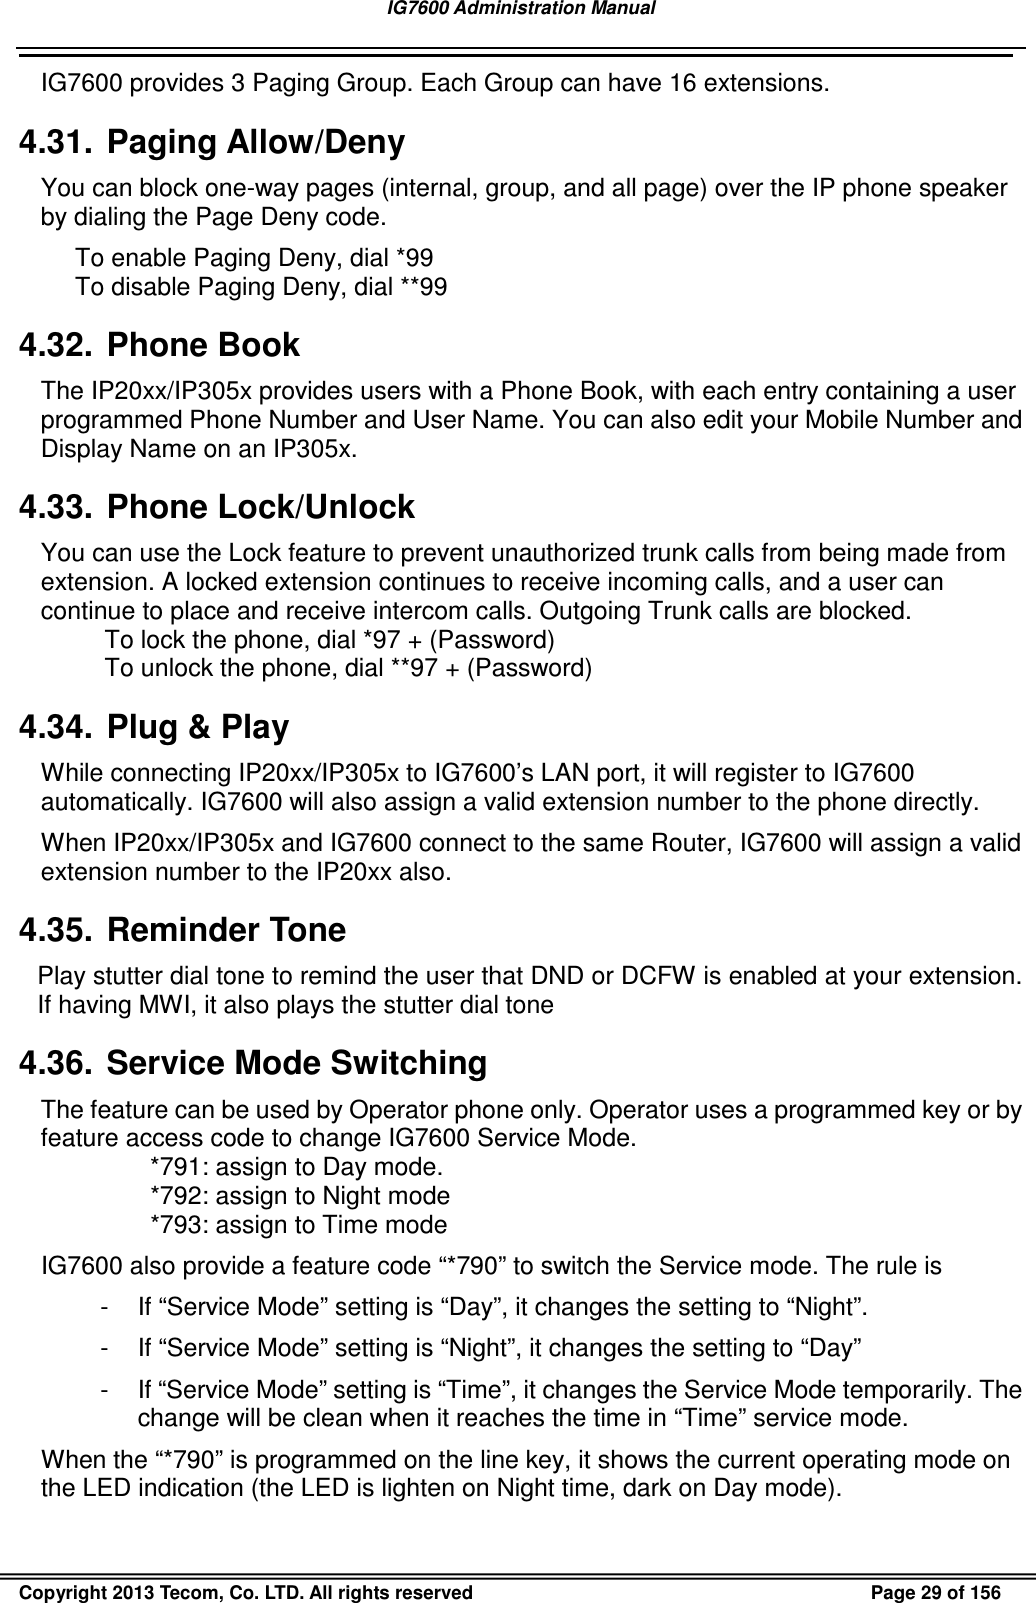 IG7600 Administration Manual                                                                                             Copyright 2013 Tecom, Co. LTD. All rights reserved  Page 29 of 156 IG7600 provides 3 Paging Group. Each Group can have 16 extensions. 4.31.  Paging Allow/Deny You can block one-way pages (internal, group, and all page) over the IP phone speaker by dialing the Page Deny code. To enable Paging Deny, dial *99 To disable Paging Deny, dial **99 4.32.  Phone Book The IP20xx/IP305x provides users with a Phone Book, with each entry containing a user programmed Phone Number and User Name. You can also edit your Mobile Number and Display Name on an IP305x. 4.33.  Phone Lock/Unlock You can use the Lock feature to prevent unauthorized trunk calls from being made from extension. A locked extension continues to receive incoming calls, and a user can continue to place and receive intercom calls. Outgoing Trunk calls are blocked. To lock the phone, dial *97 + (Password) To unlock the phone, dial **97 + (Password) 4.34.  Plug &amp; Play While connecting IP20xx/IP305x to IG7600’s LAN port, it will register to IG7600 automatically. IG7600 will also assign a valid extension number to the phone directly. When IP20xx/IP305x and IG7600 connect to the same Router, IG7600 will assign a valid extension number to the IP20xx also. 4.35.  Reminder Tone Play stutter dial tone to remind the user that DND or DCFW is enabled at your extension. If having MWI, it also plays the stutter dial tone 4.36.  Service Mode Switching The feature can be used by Operator phone only. Operator uses a programmed key or by feature access code to change IG7600 Service Mode. *791: assign to Day mode. *792: assign to Night mode *793: assign to Time mode IG7600 also provide a feature code “*790” to switch the Service mode. The rule is -  If “Service Mode” setting is “Day”, it changes the setting to “Night”. -  If “Service Mode” setting is “Night”, it changes the setting to “Day” -  If “Service Mode” setting is “Time”, it changes the Service Mode temporarily. The change will be clean when it reaches the time in “Time” service mode. When the “*790” is programmed on the line key, it shows the current operating mode on the LED indication (the LED is lighten on Night time, dark on Day mode). 